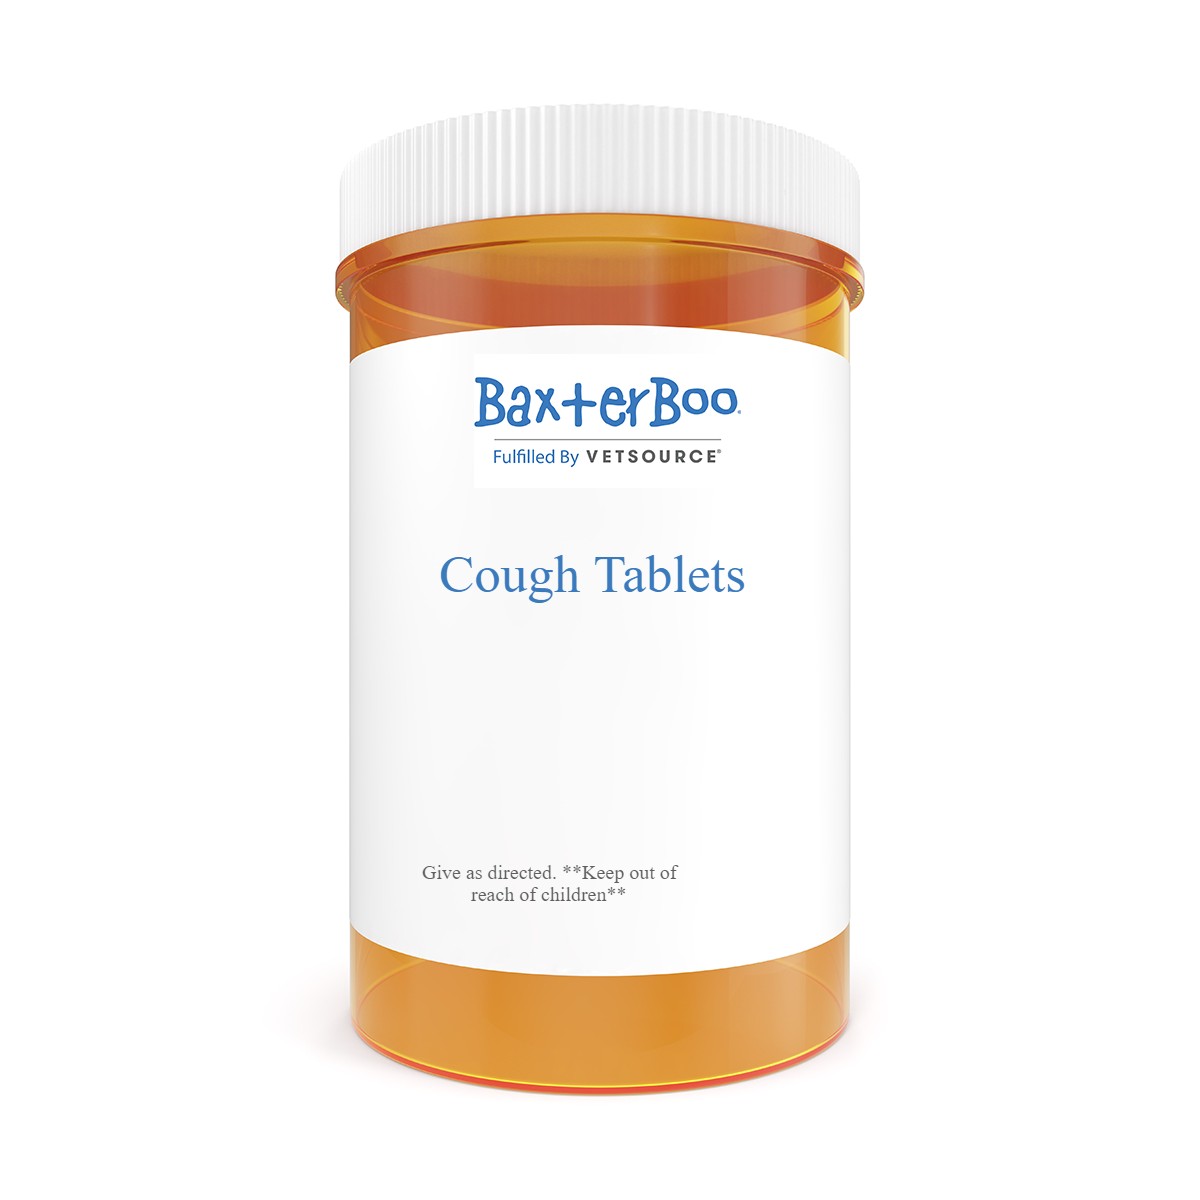 Cough Tablets for Dogs and Cats